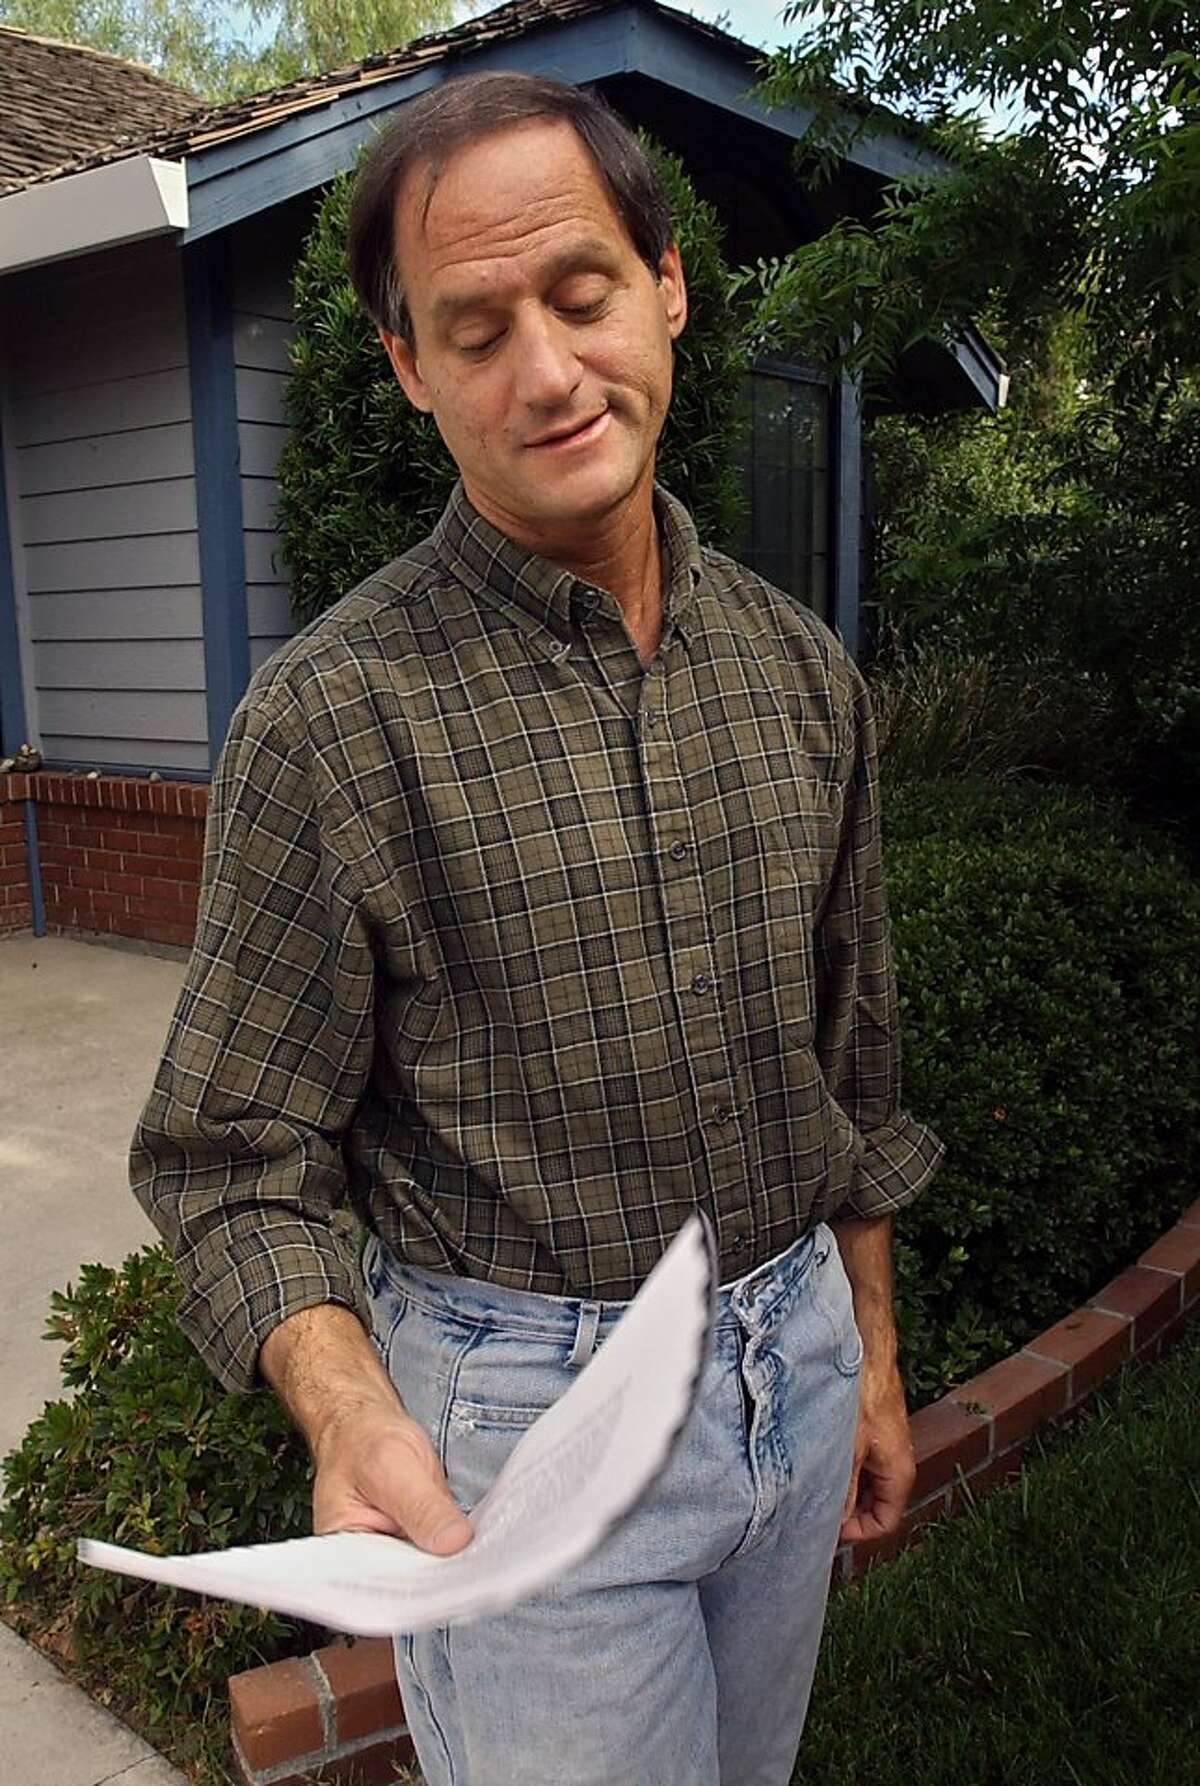 File - In this June 14, 2004 file photo, Michael Newdow looks down at the fax copy of the Supreme Court's ruling preserving the phrase "one nation under God" in the Pledge of Allegiance outside his Sacramento, Calif., home. A federal appeals court in SanFrancisco has ruled that the phrase "under God" in the Pledge of Allegiance is constitutional. In a 2-1 ruling, the 9th U.S. Circuit Court of Appeals panel rejected arguments by Newdow that the phrase violates the separation between church and state.